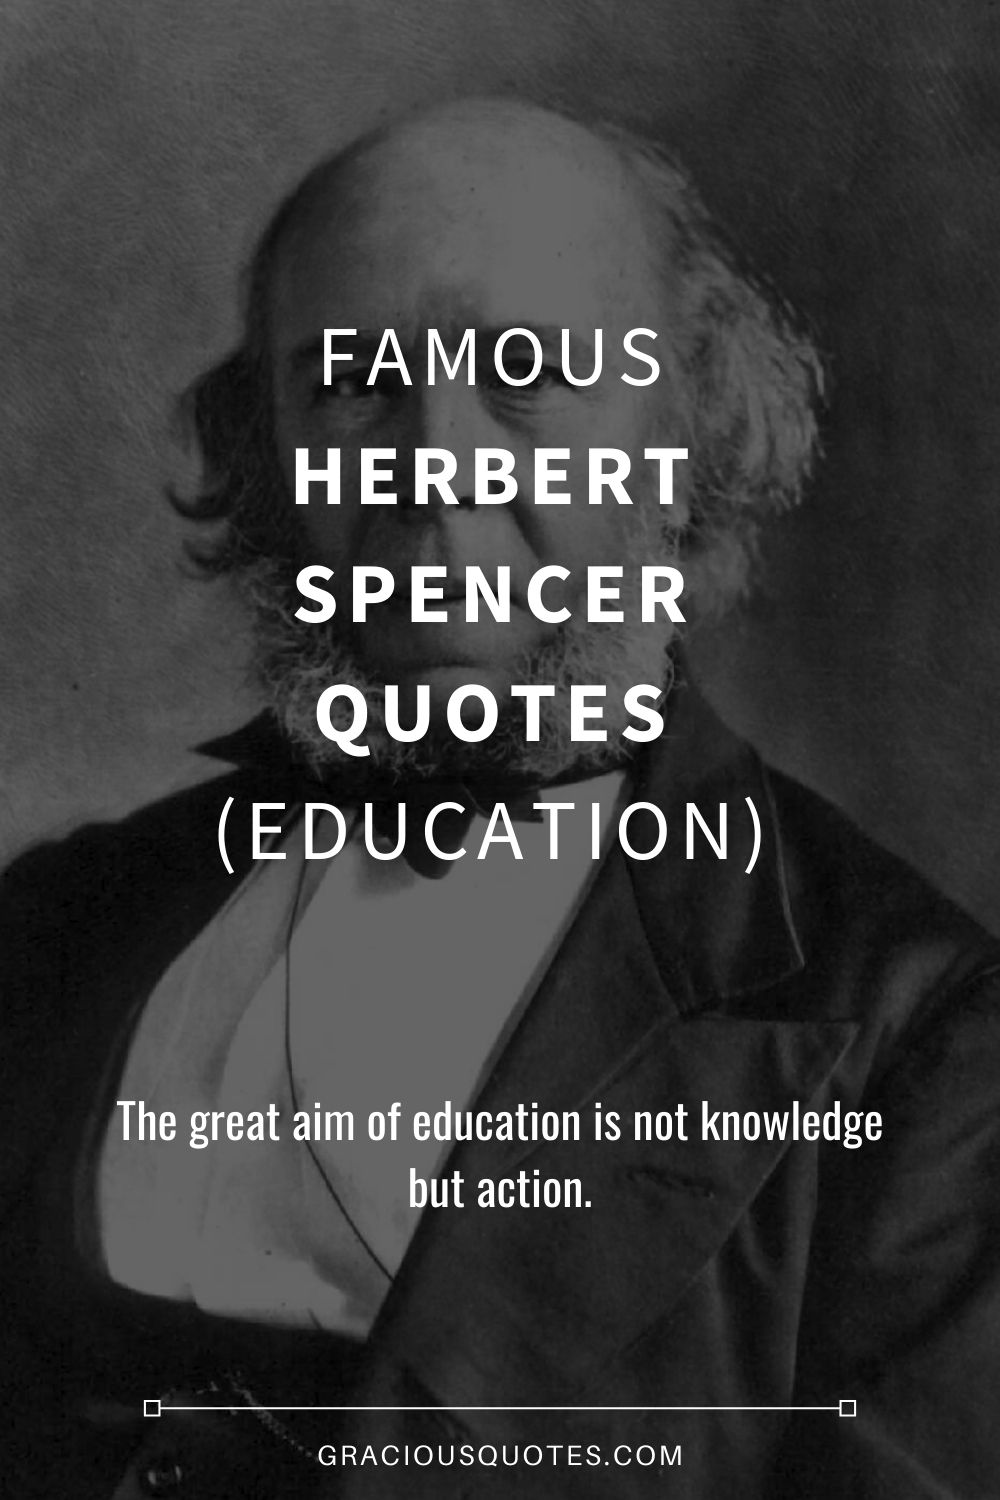 Famous Herbert Spencer Quotes (EDUCATION) - Gracious Quotes